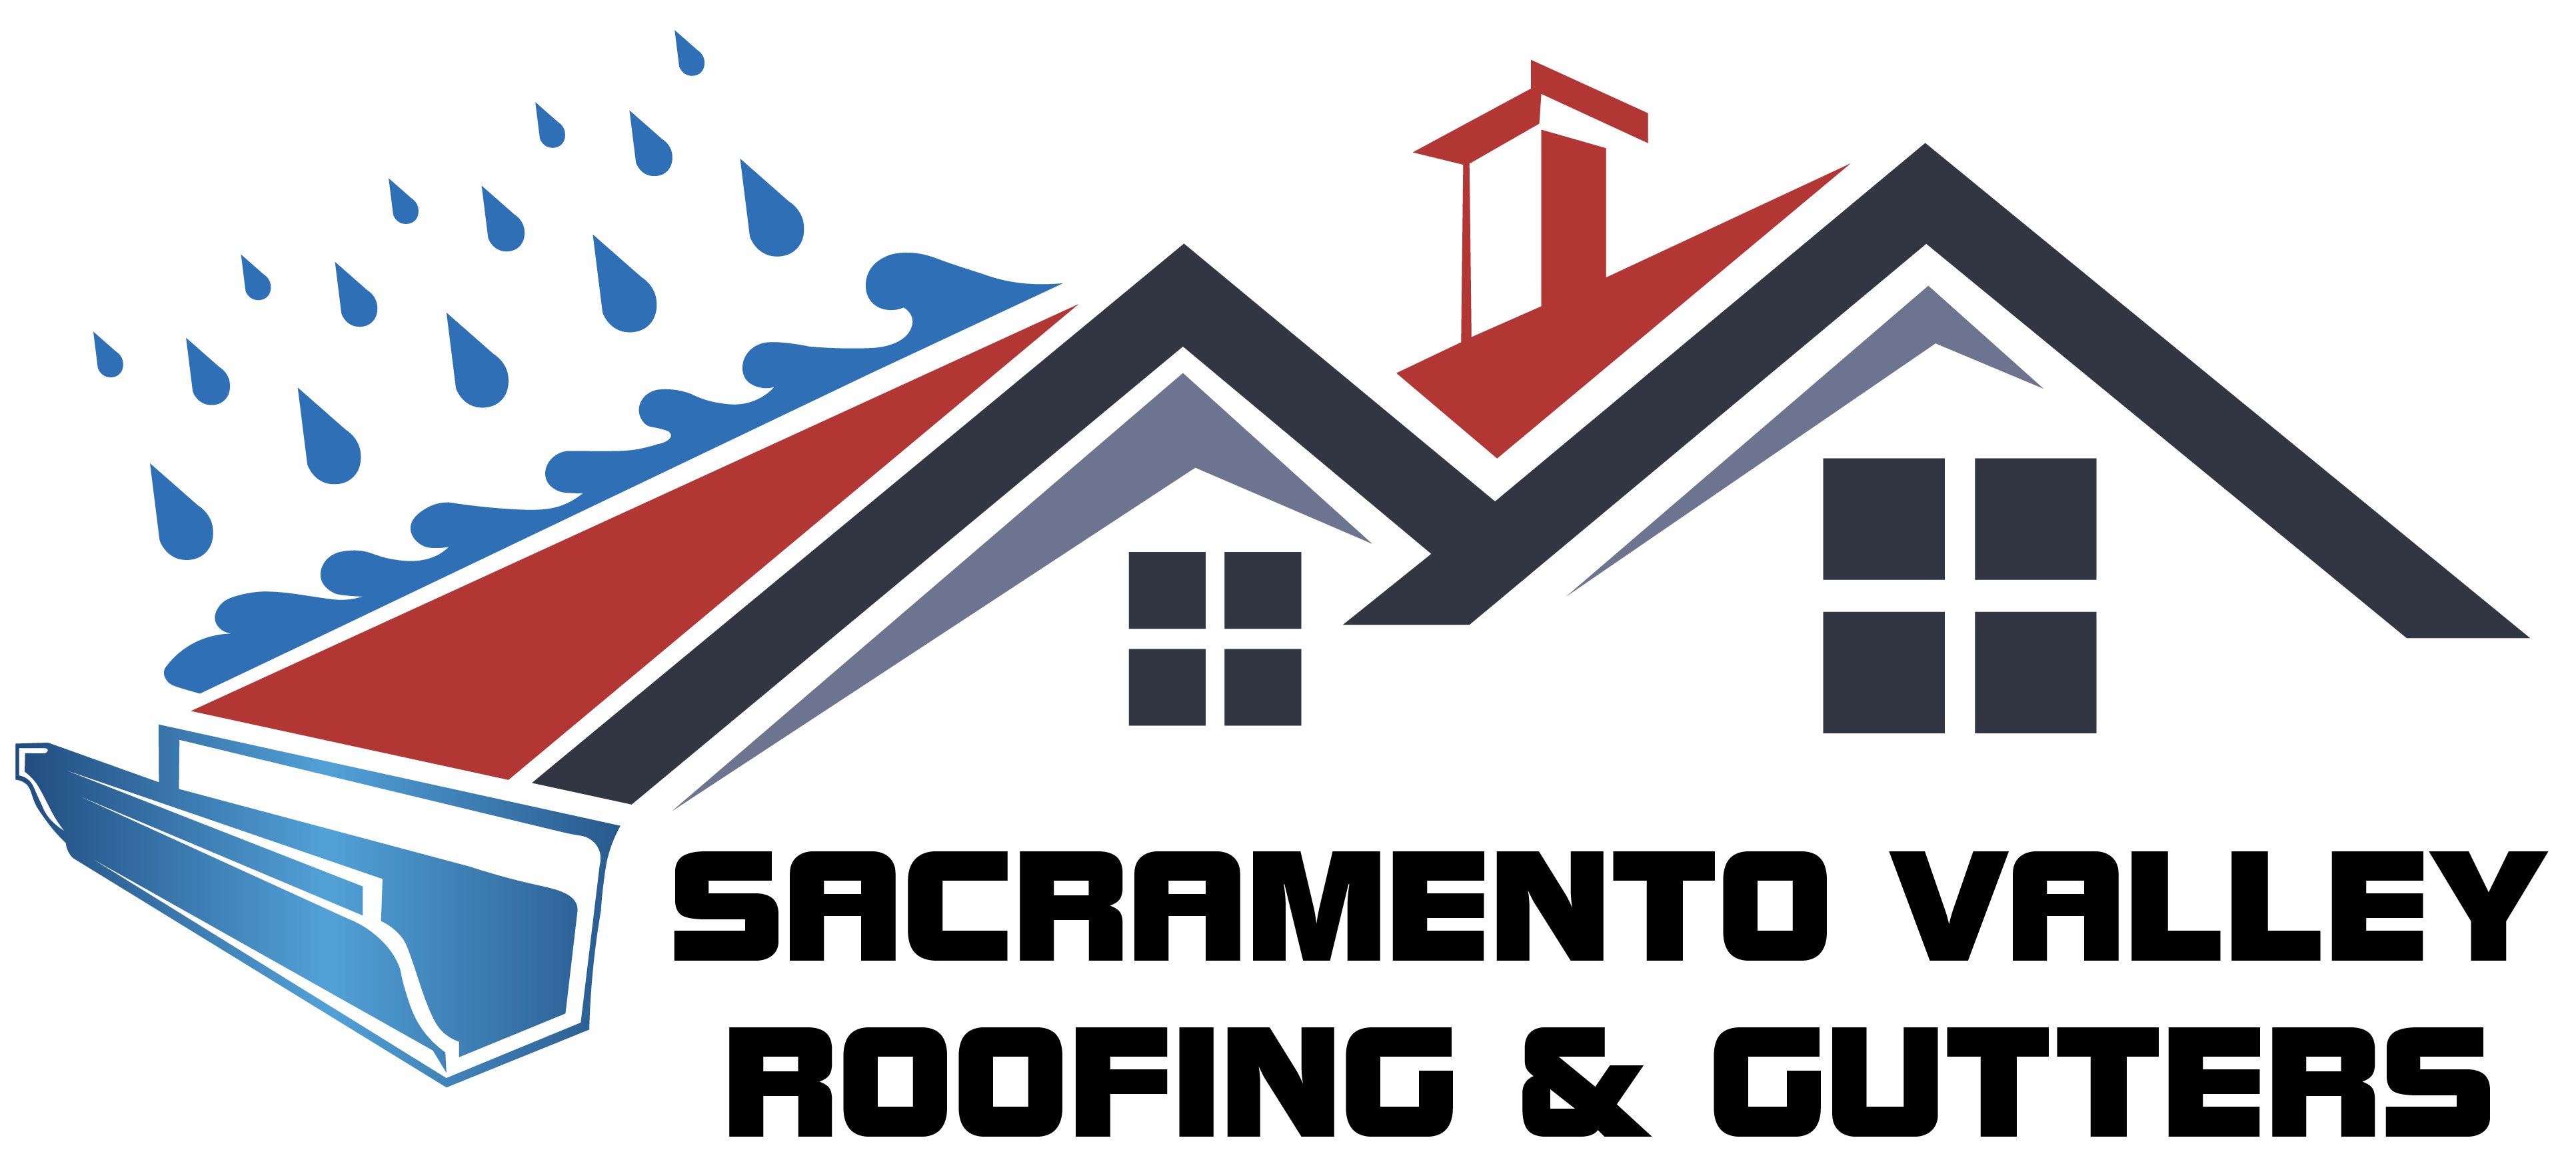 Sacramento Valley Roofing and Gutters Logo